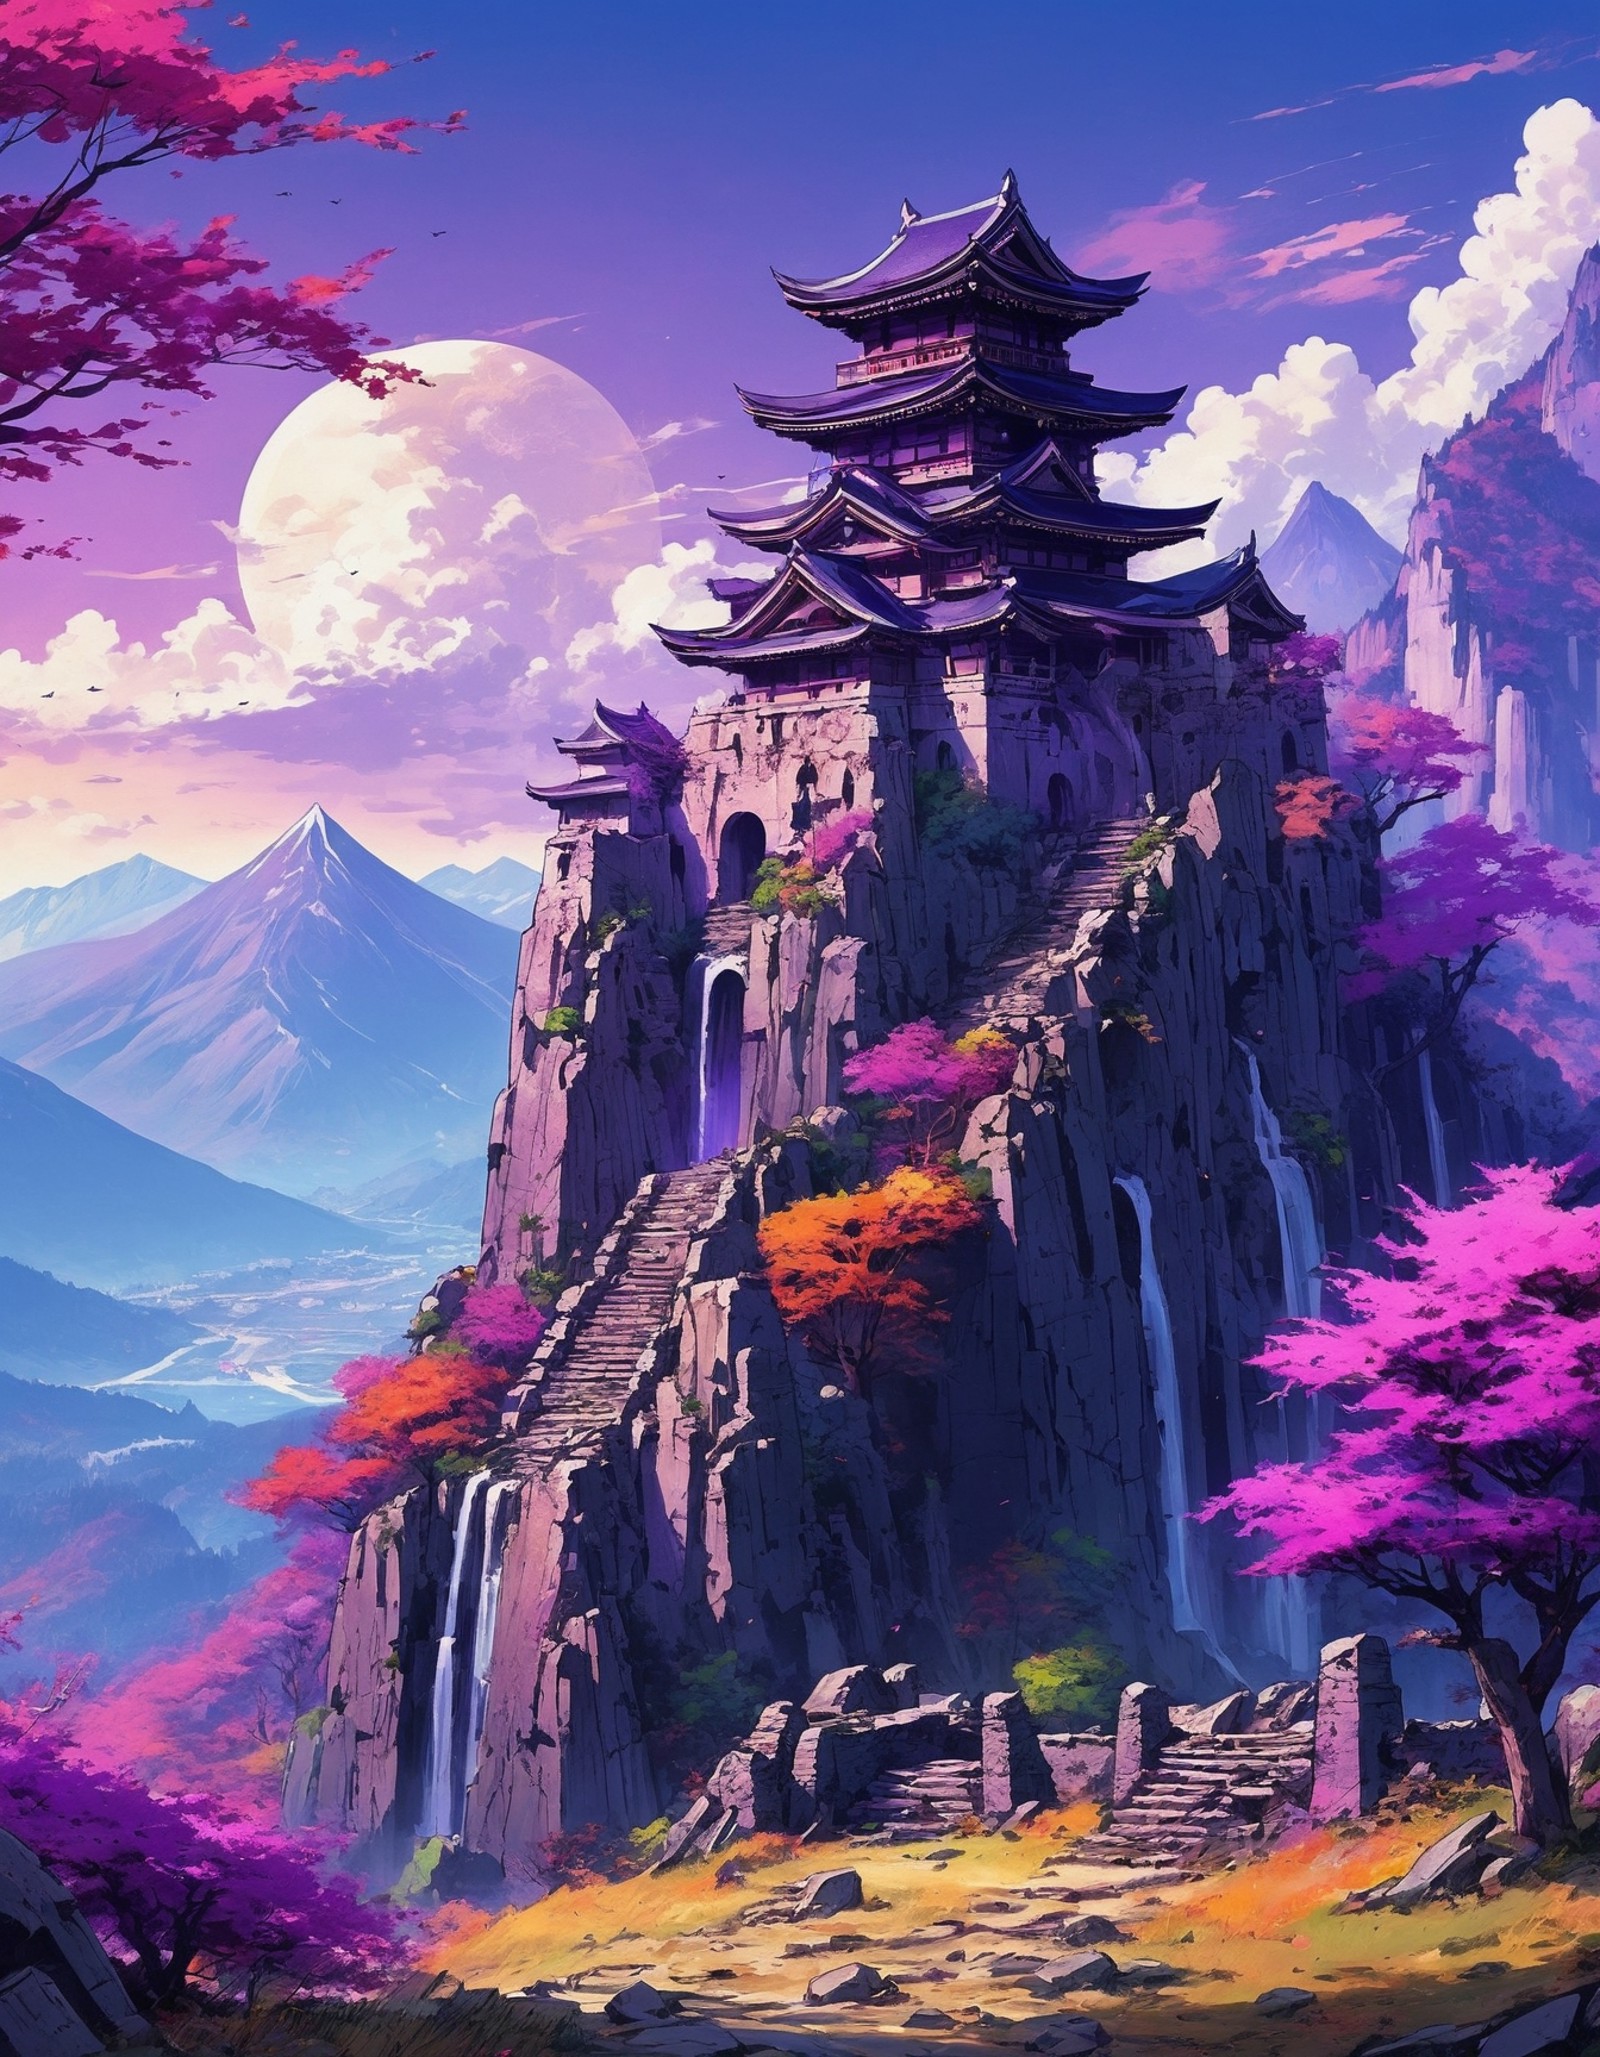 masterpiece, anime style, sharp, no humans, perfect landscape, mountains, purple trees, ruins, vibrant, colorful